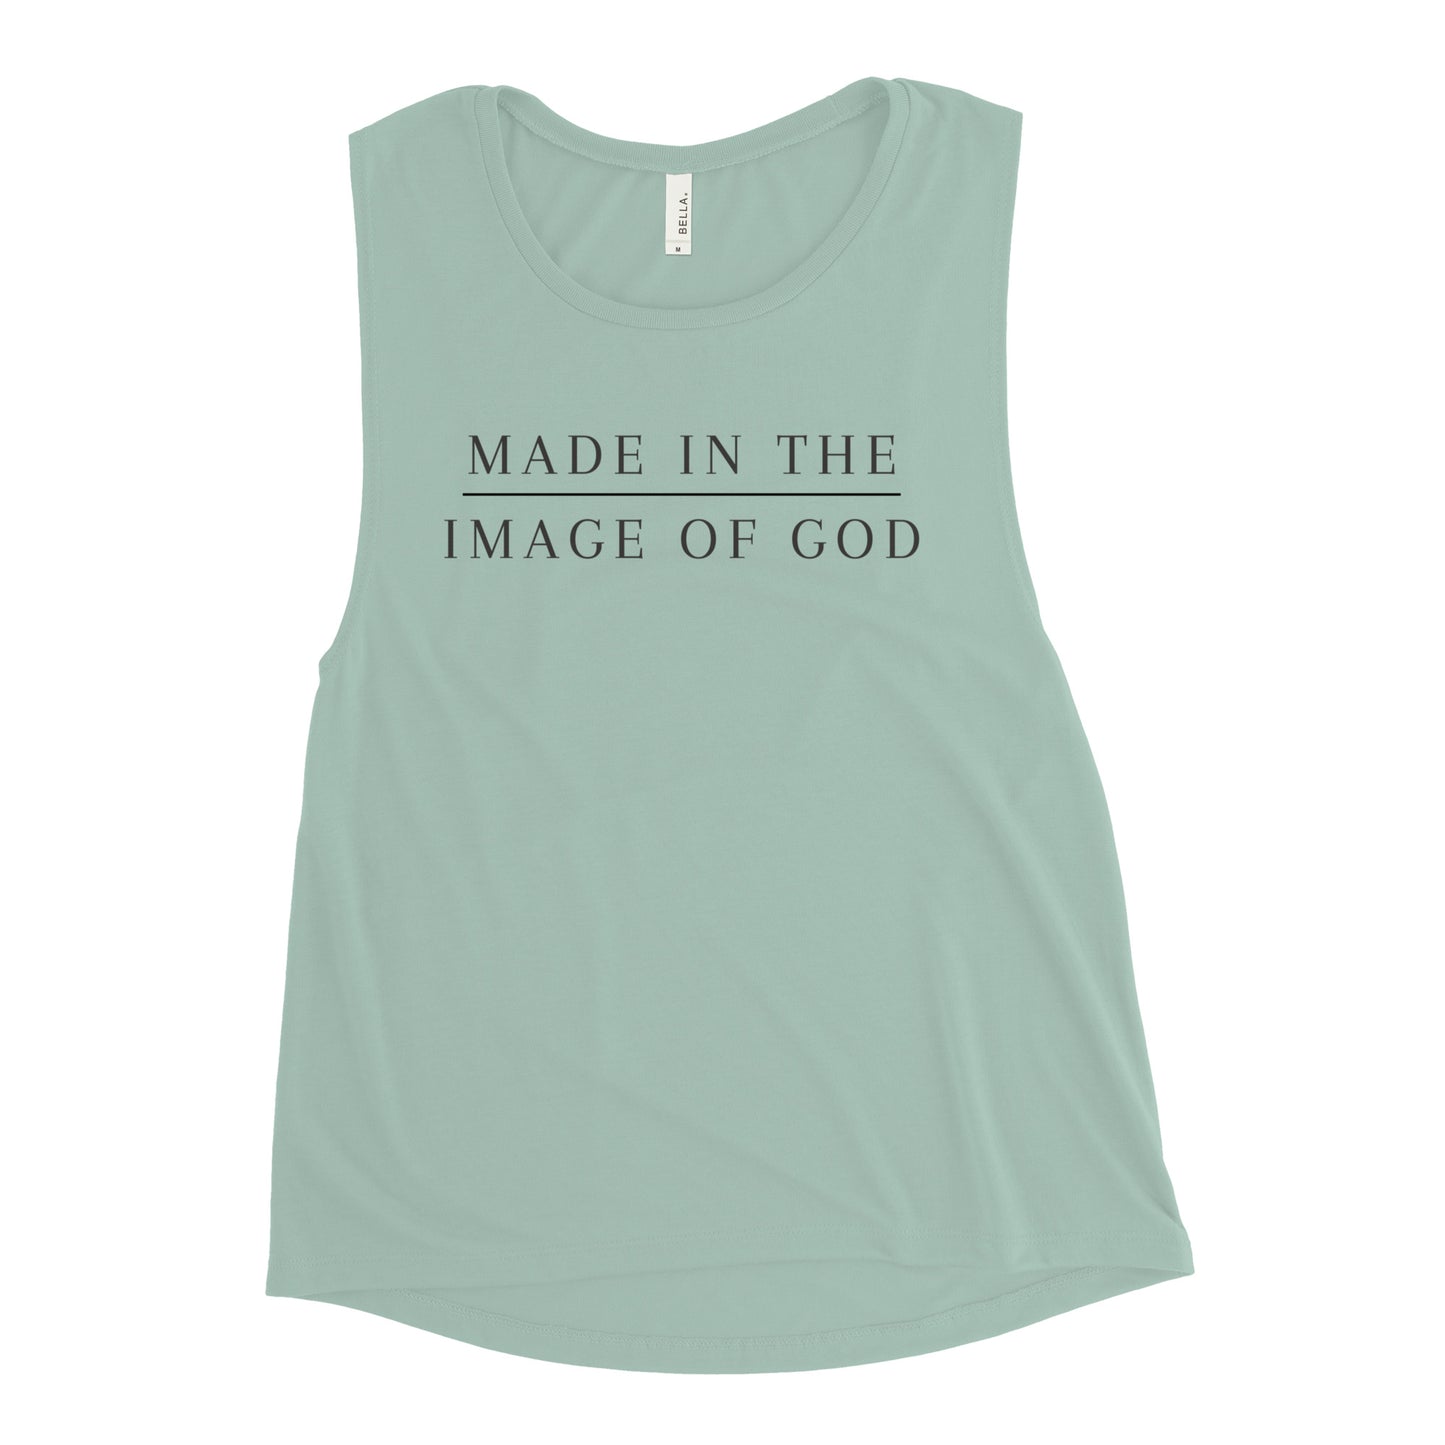 Made in the Image of God Ladies’ Muscle Tank